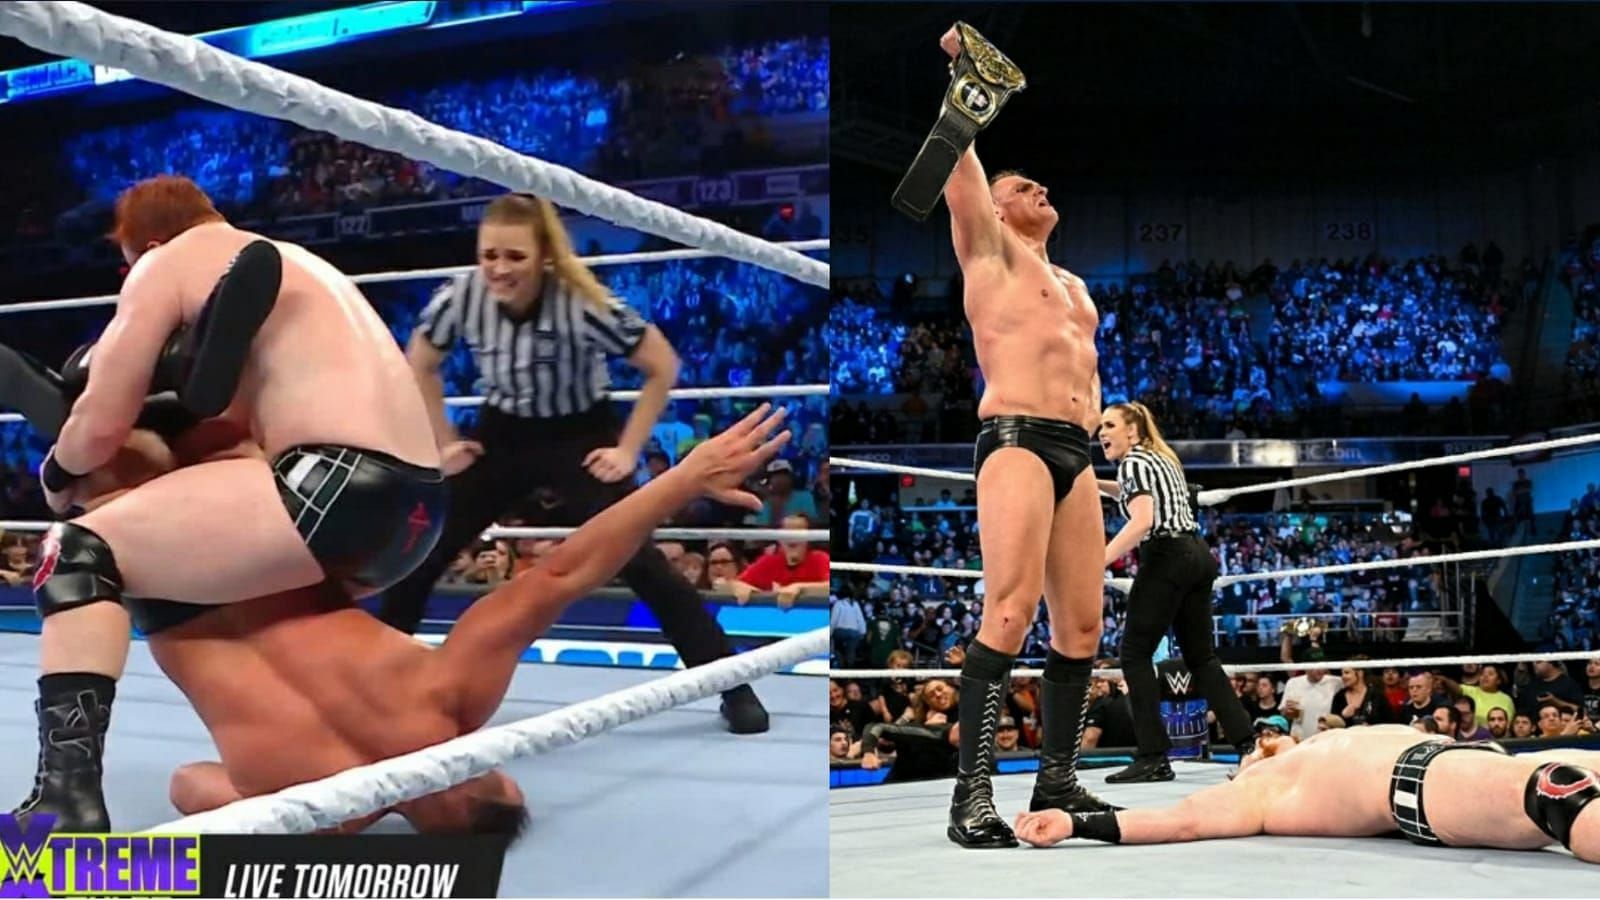 Gunther vs. Sheamus ended on a controversial note on SmackDown